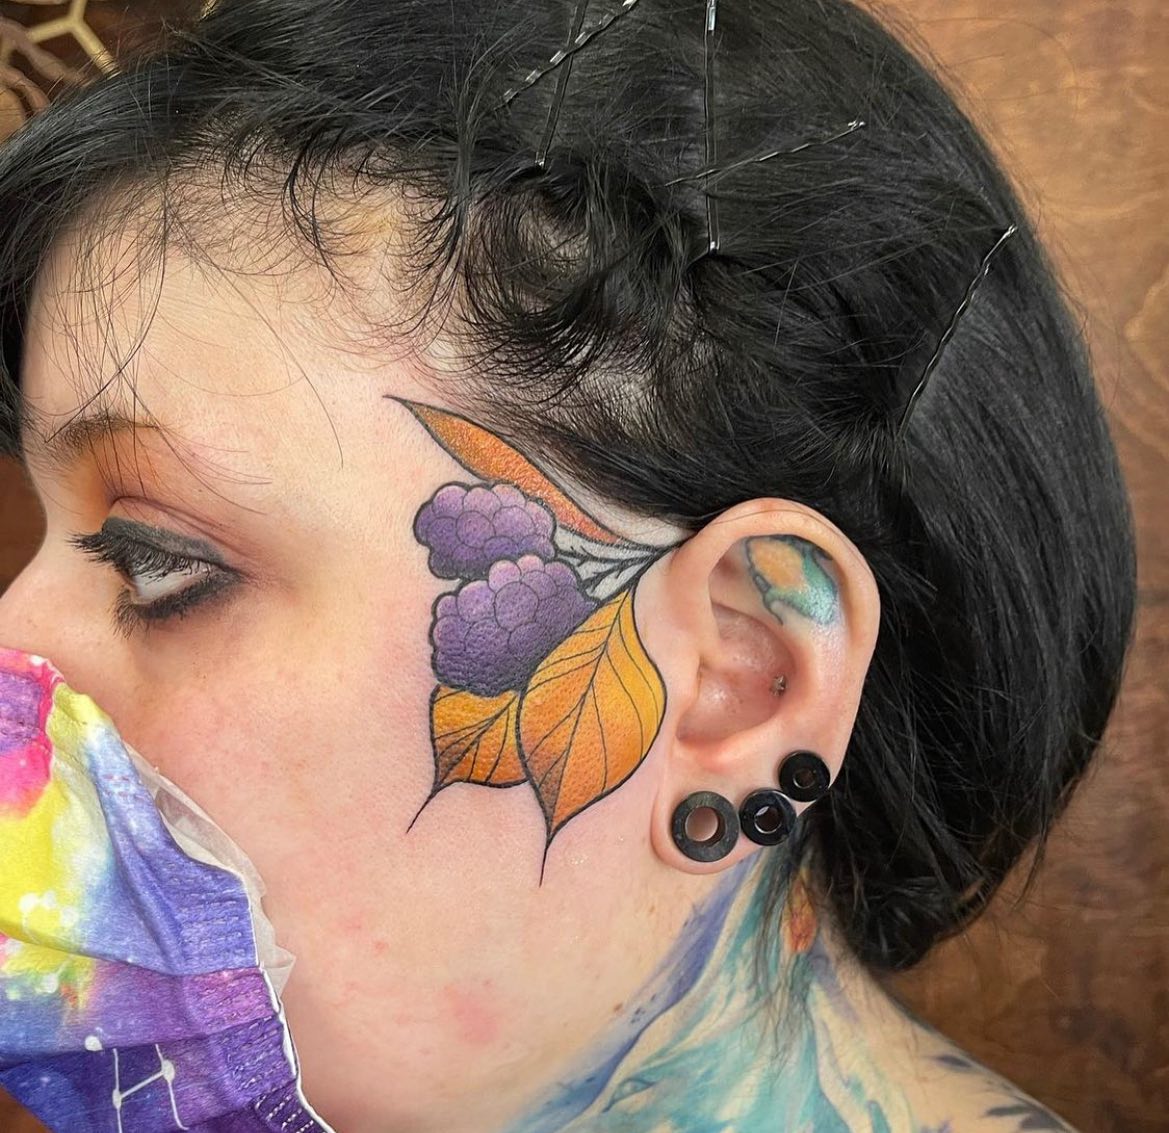 Women who like to look feminine and those who are firm believers in the power of positive energy will like this giant and vibrant flower tattoo.